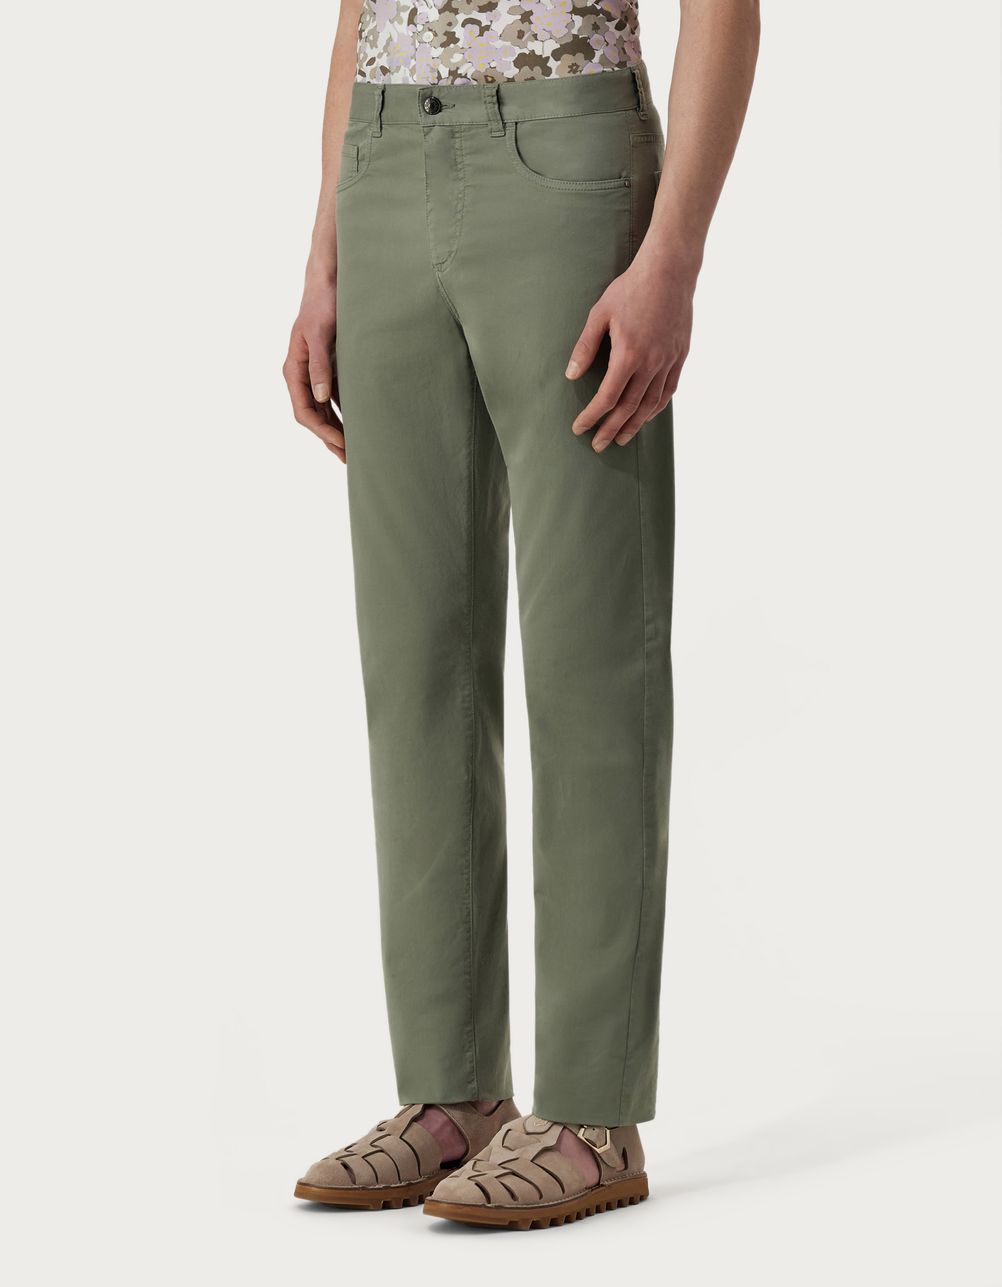 Five-pocket regular-fit pants in sage green garment-dyed cotton microtwill